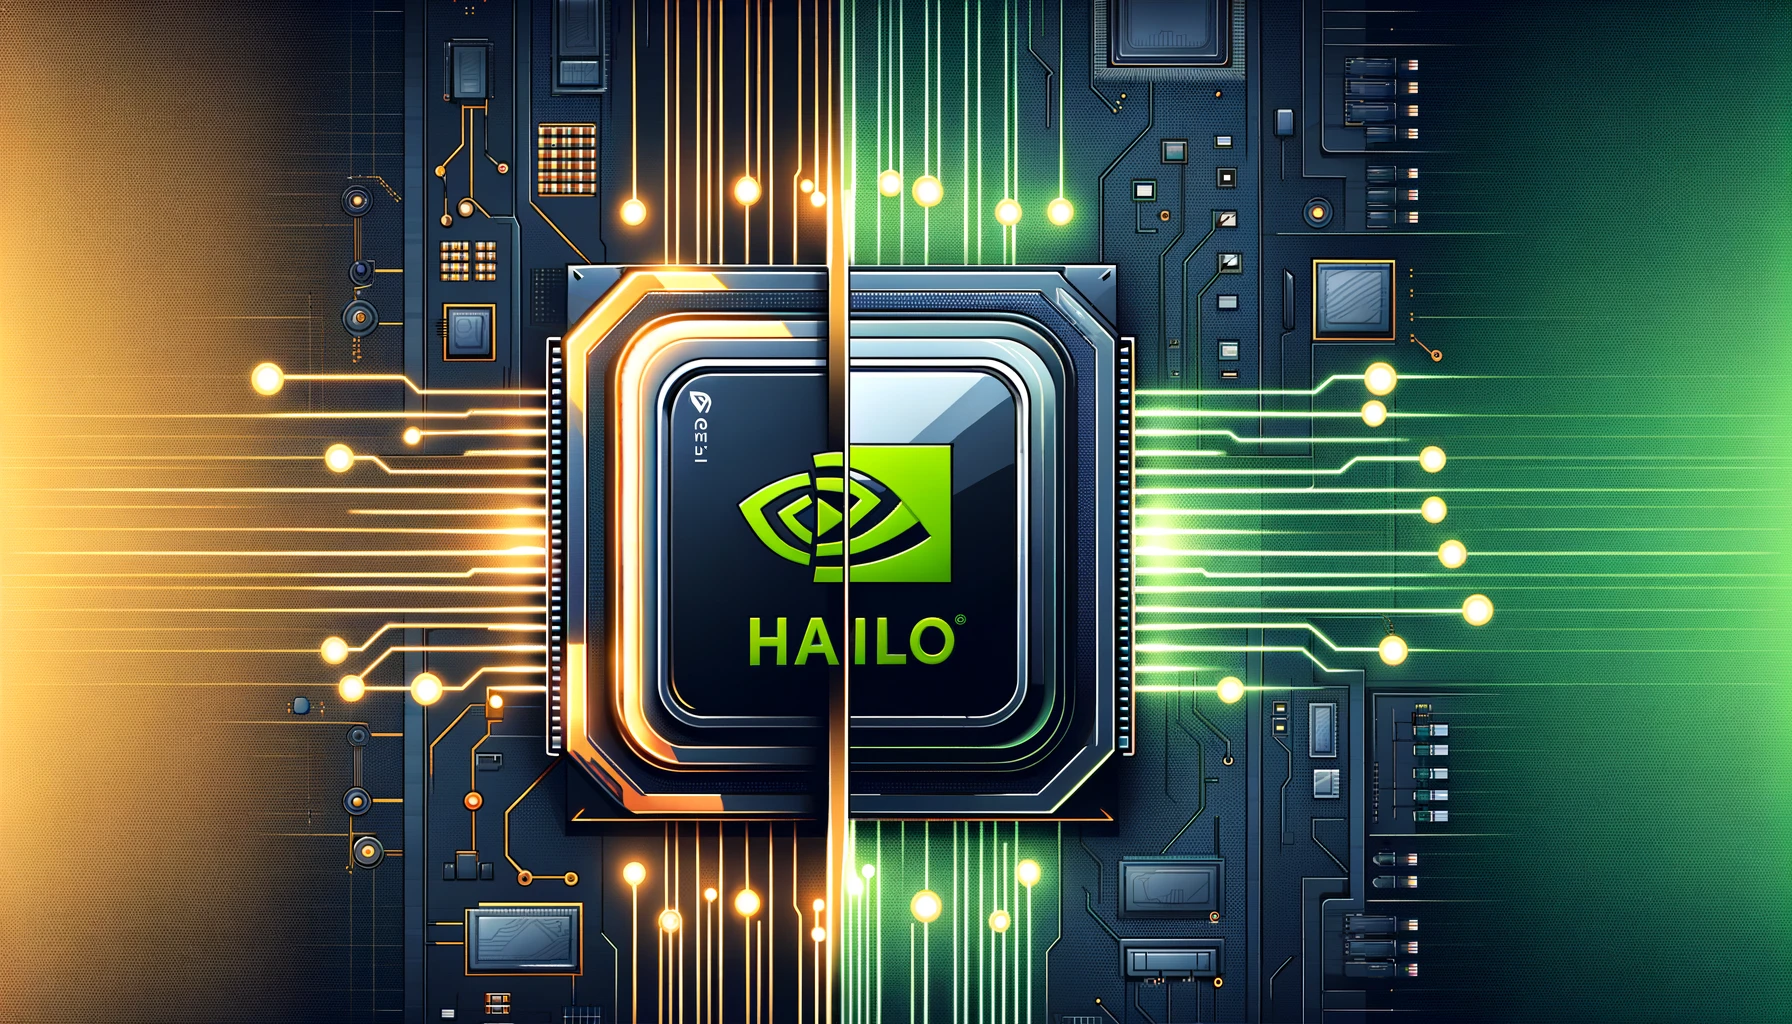 Hailo raises $120M to compete with Nvidia amid AI chip startup challenges